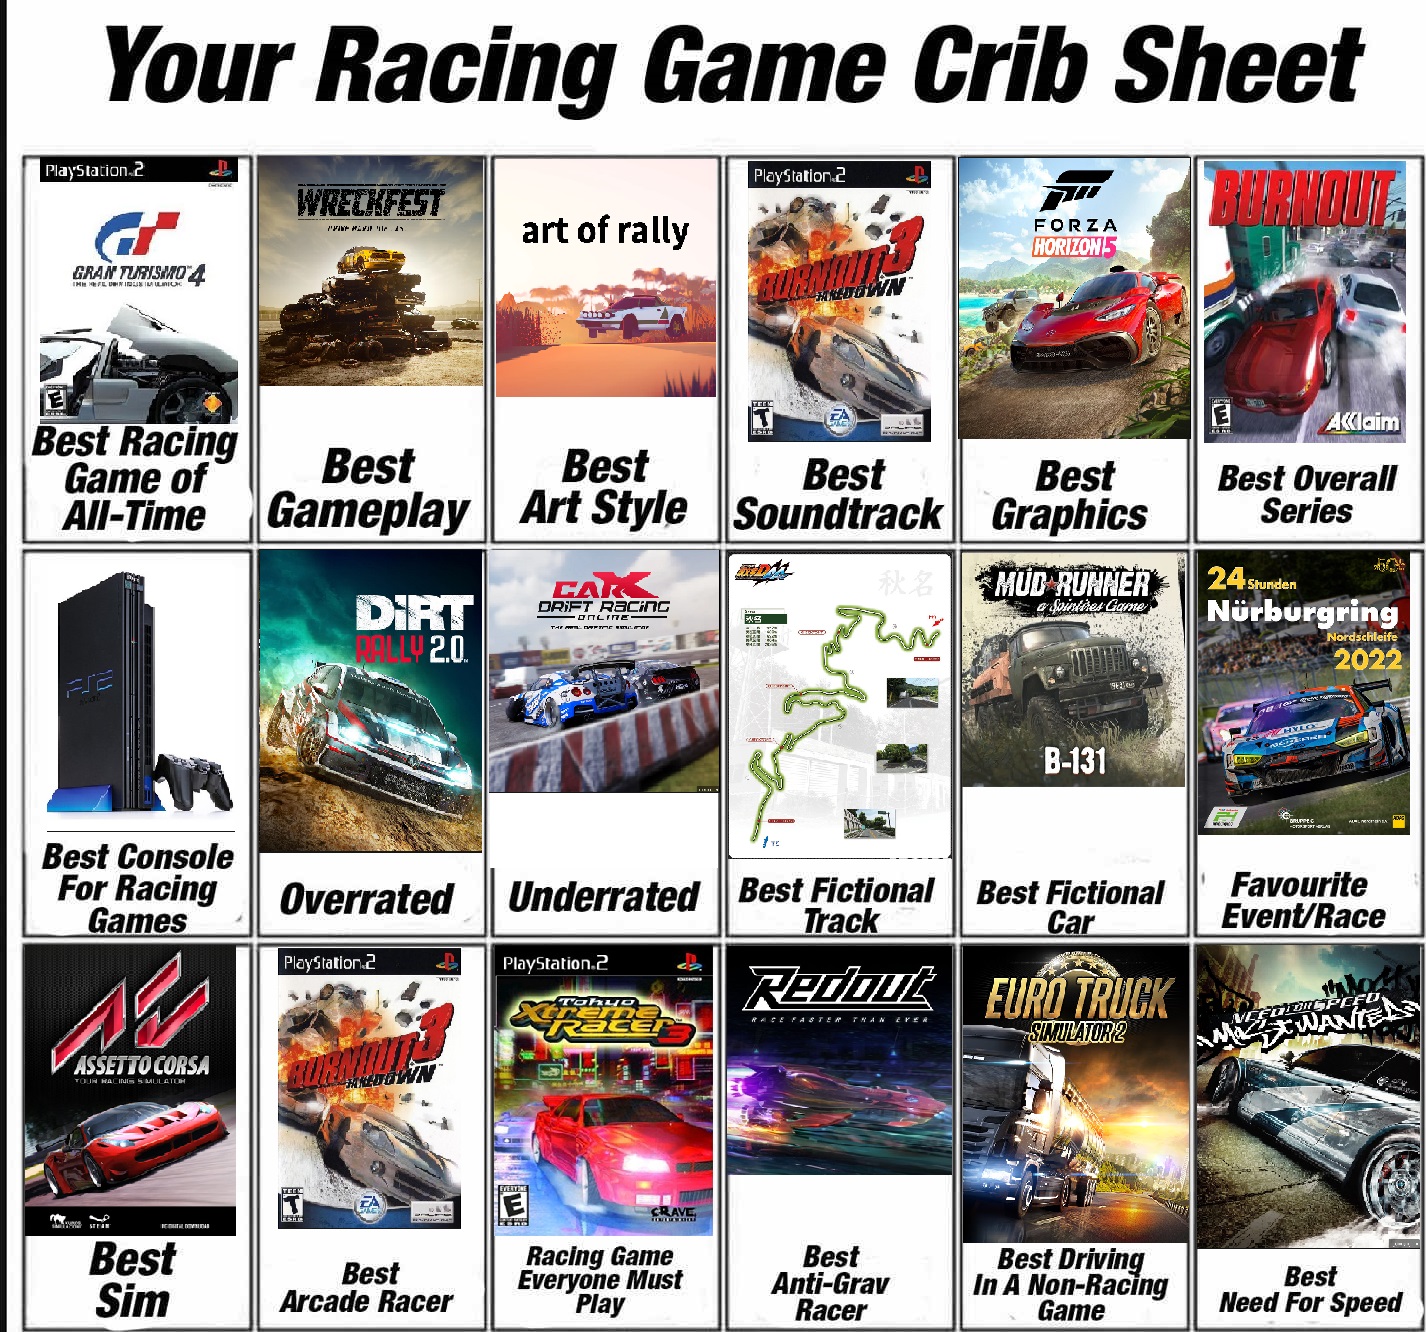 My favorite racing games, and this is still missing at least Ridge Racer Type 4